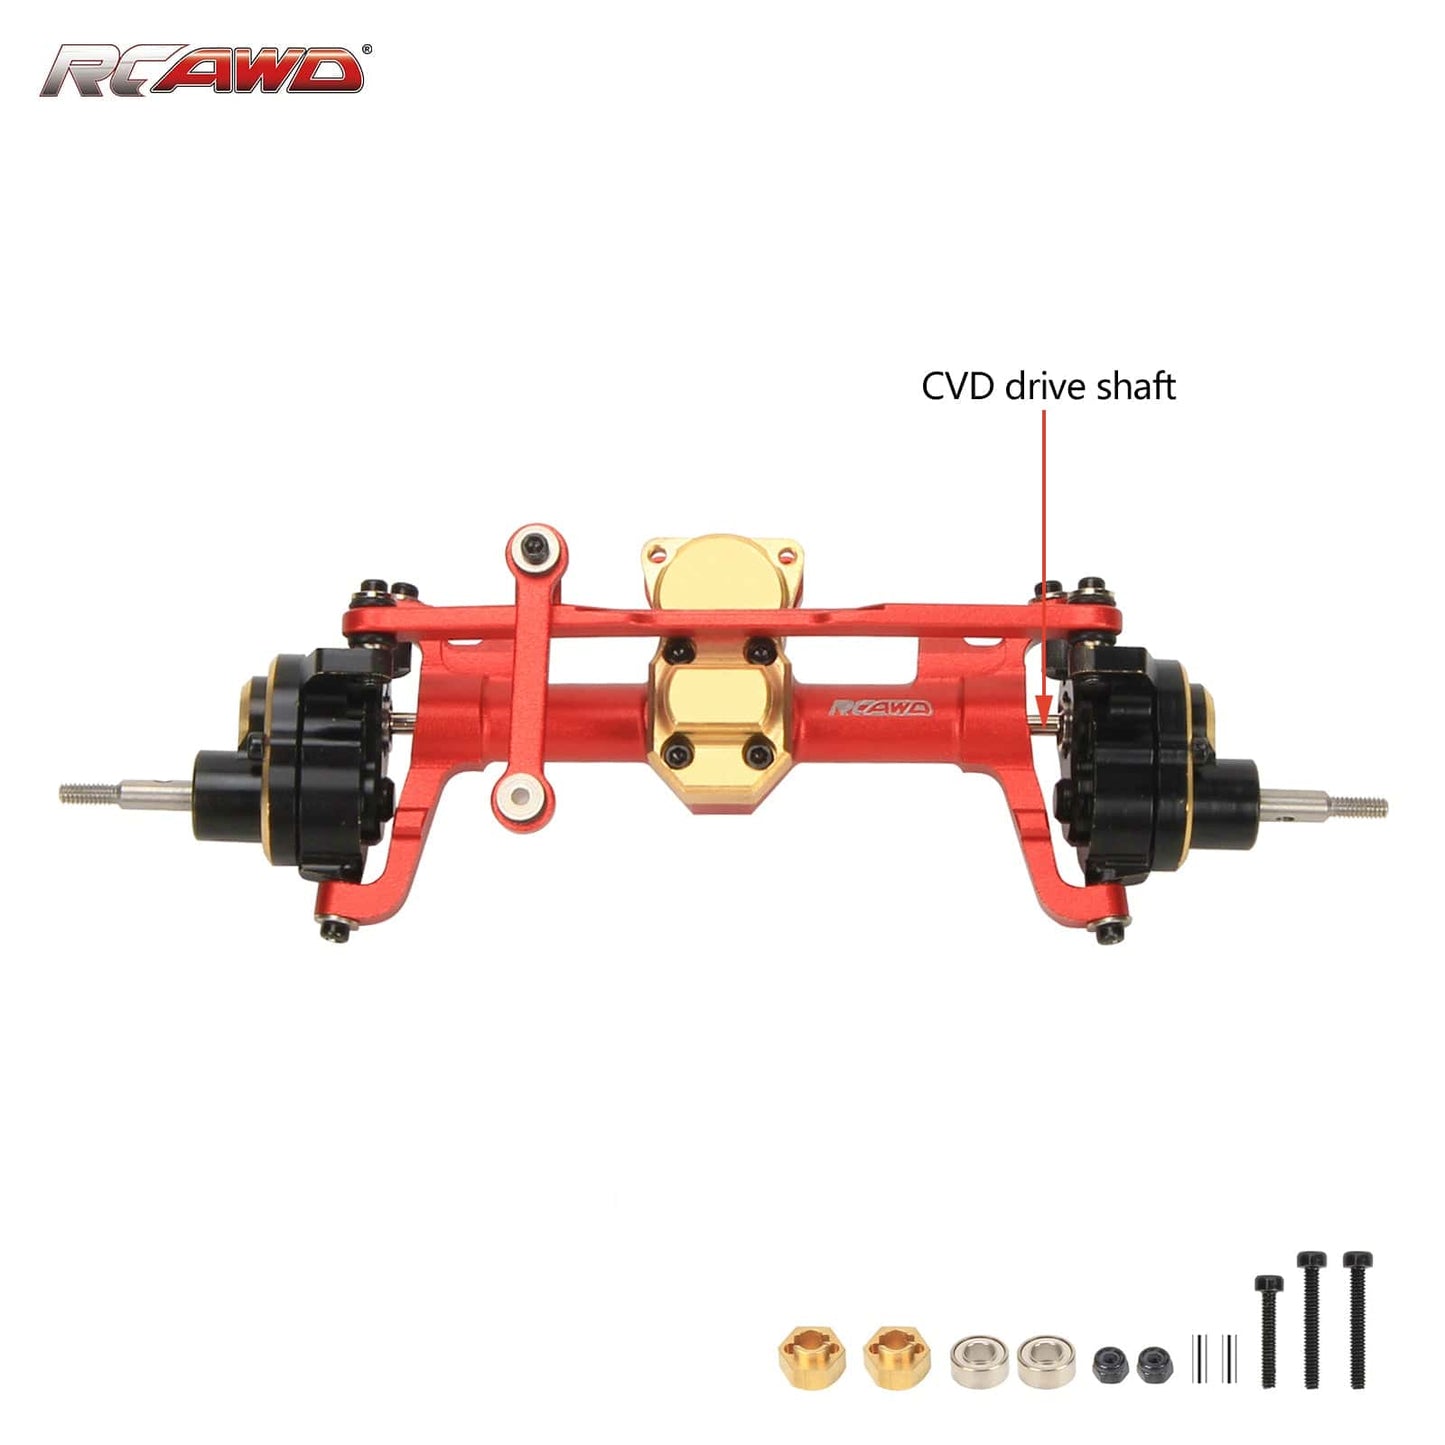 RCAWD Red / CVD RCAWD full metal front CVD portal axle for 1/24  Axial SCX24 crawlers